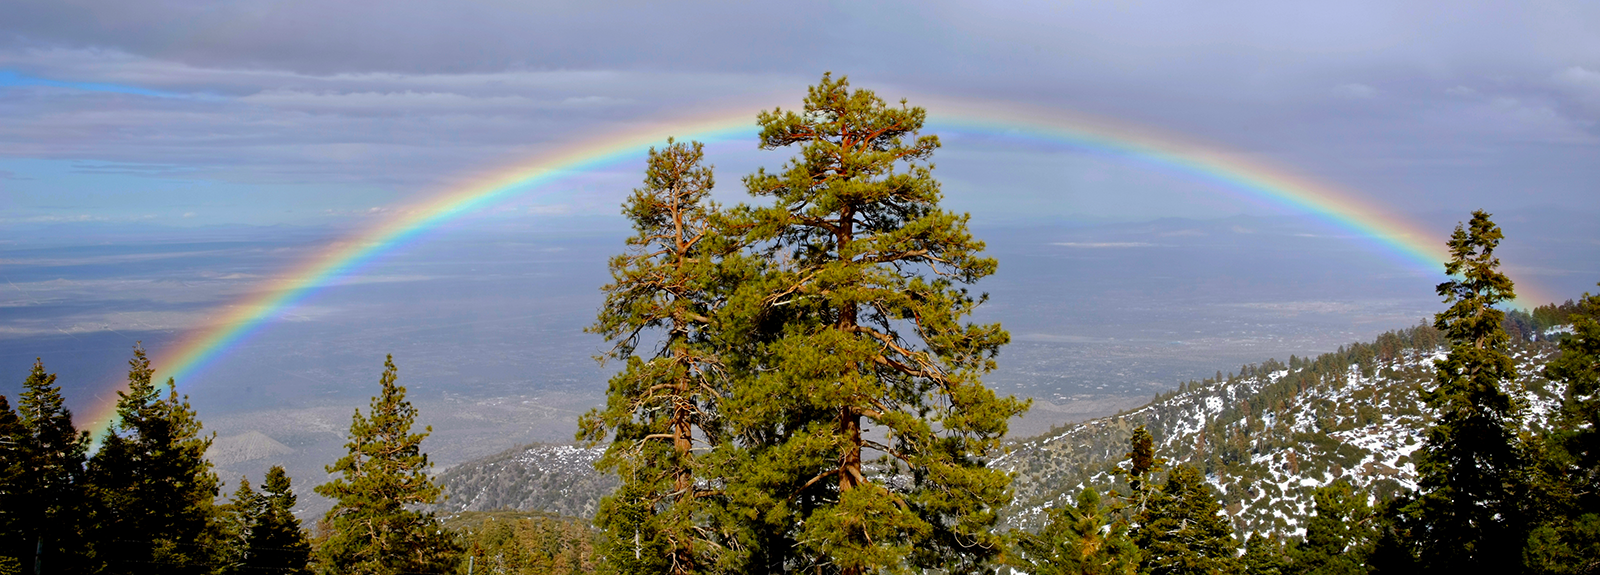 View from a mountaintop of a large rainbow with a valley in the background